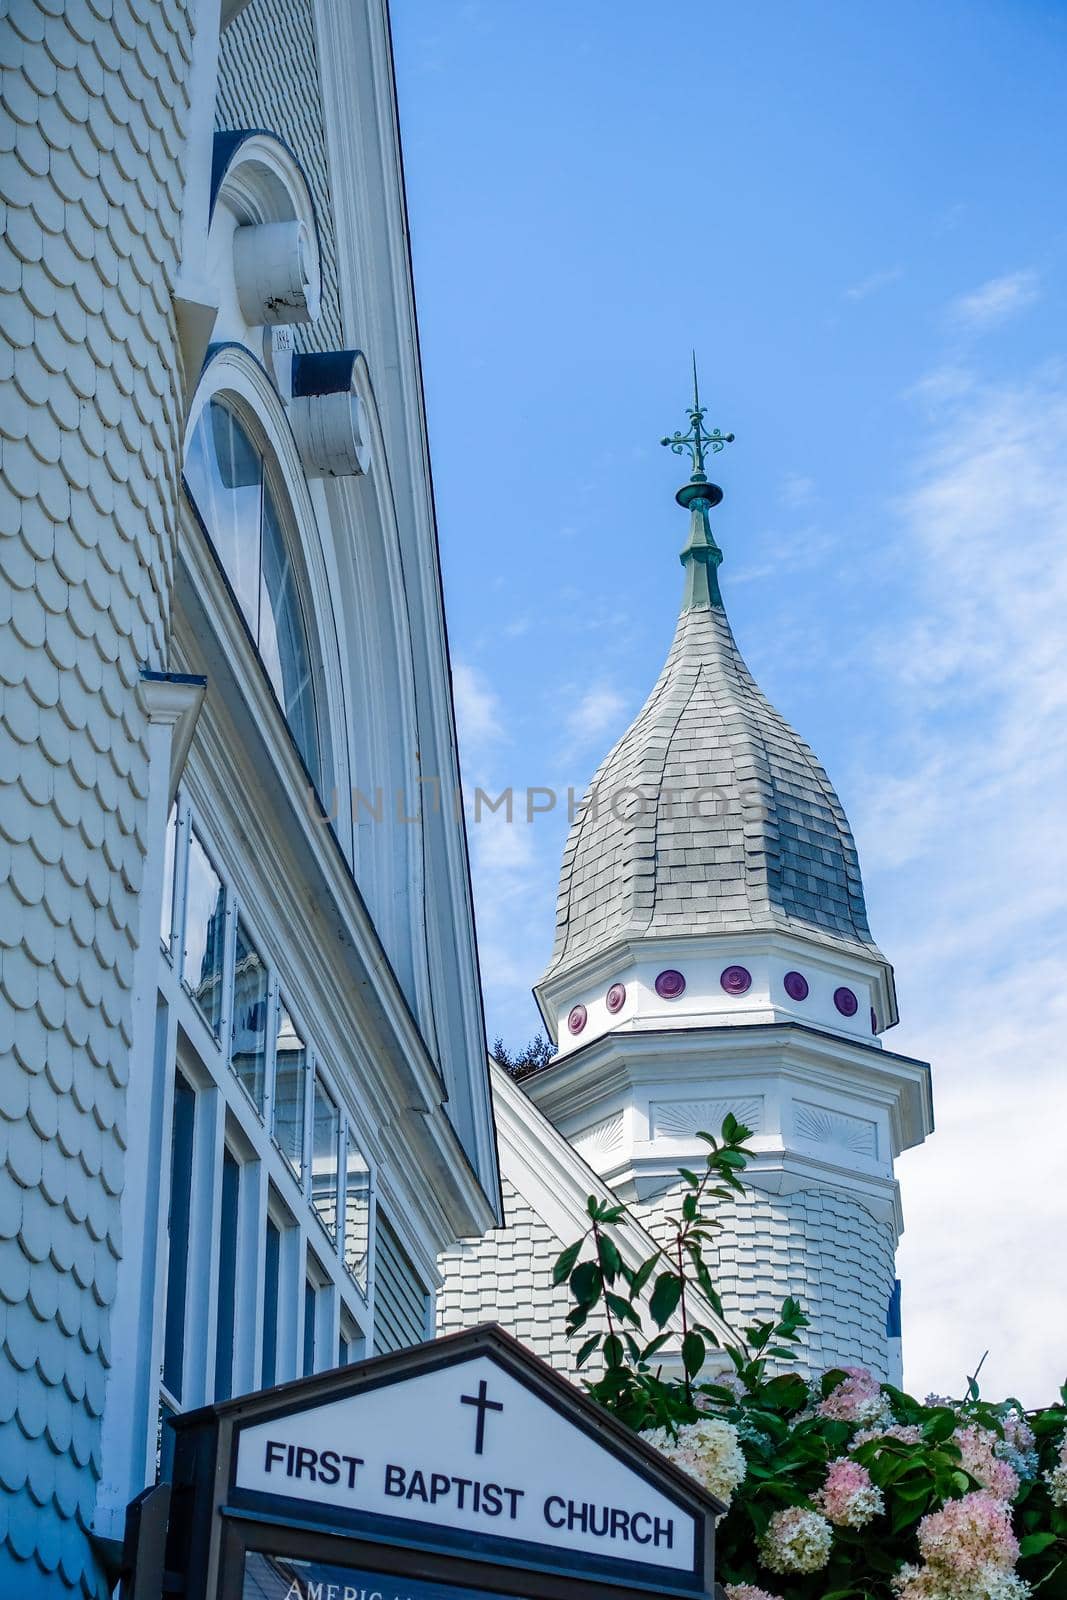 historic baptist church buildign in new england by digidreamgrafix